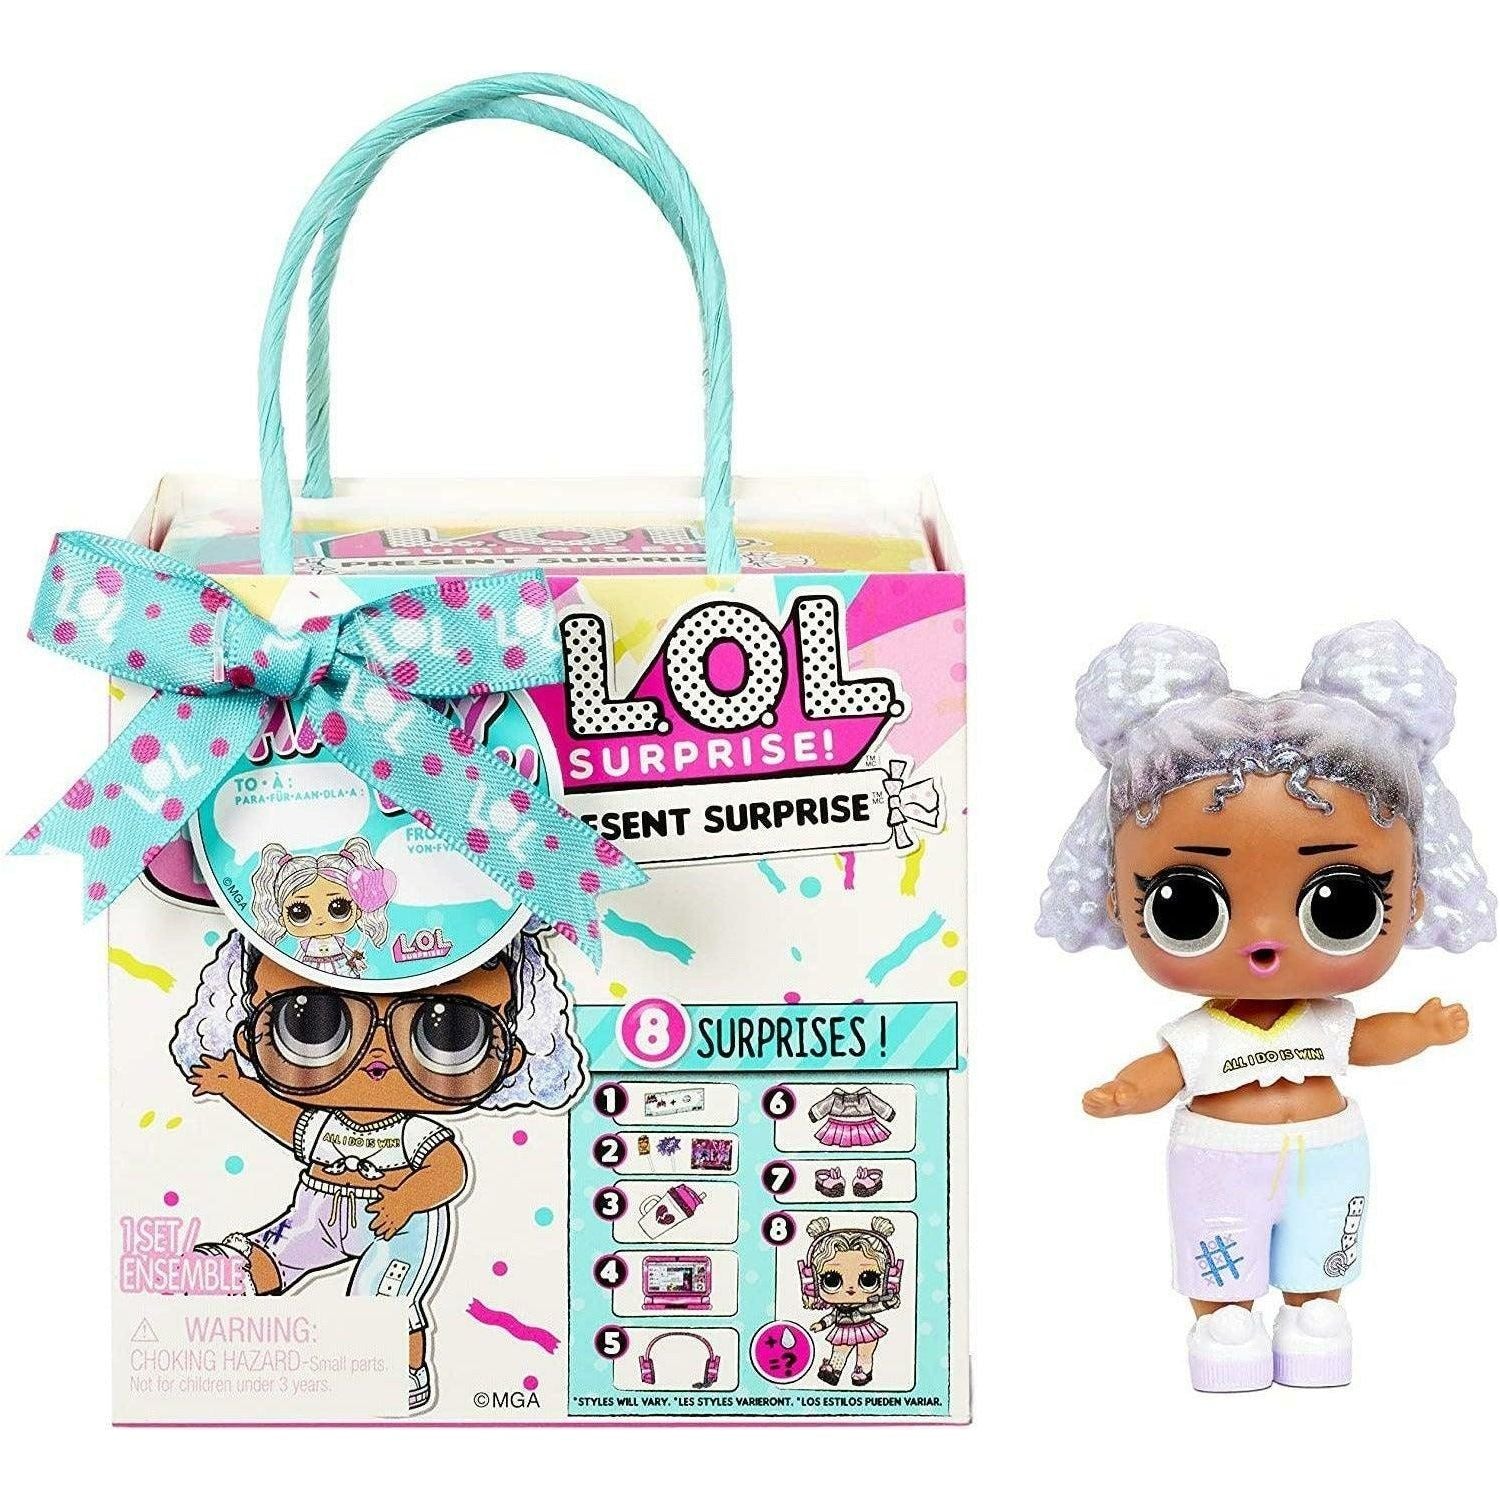 L.O.L Surprise Present Surprise™ Series 3 Birthday Month Theme with 8 Surprises (2 Sticker Sheets) - BumbleToys - 5-7 Years, Dolls, Fashion Dolls & Accessories, Girls, L.O.L, OXE, Pre-Order